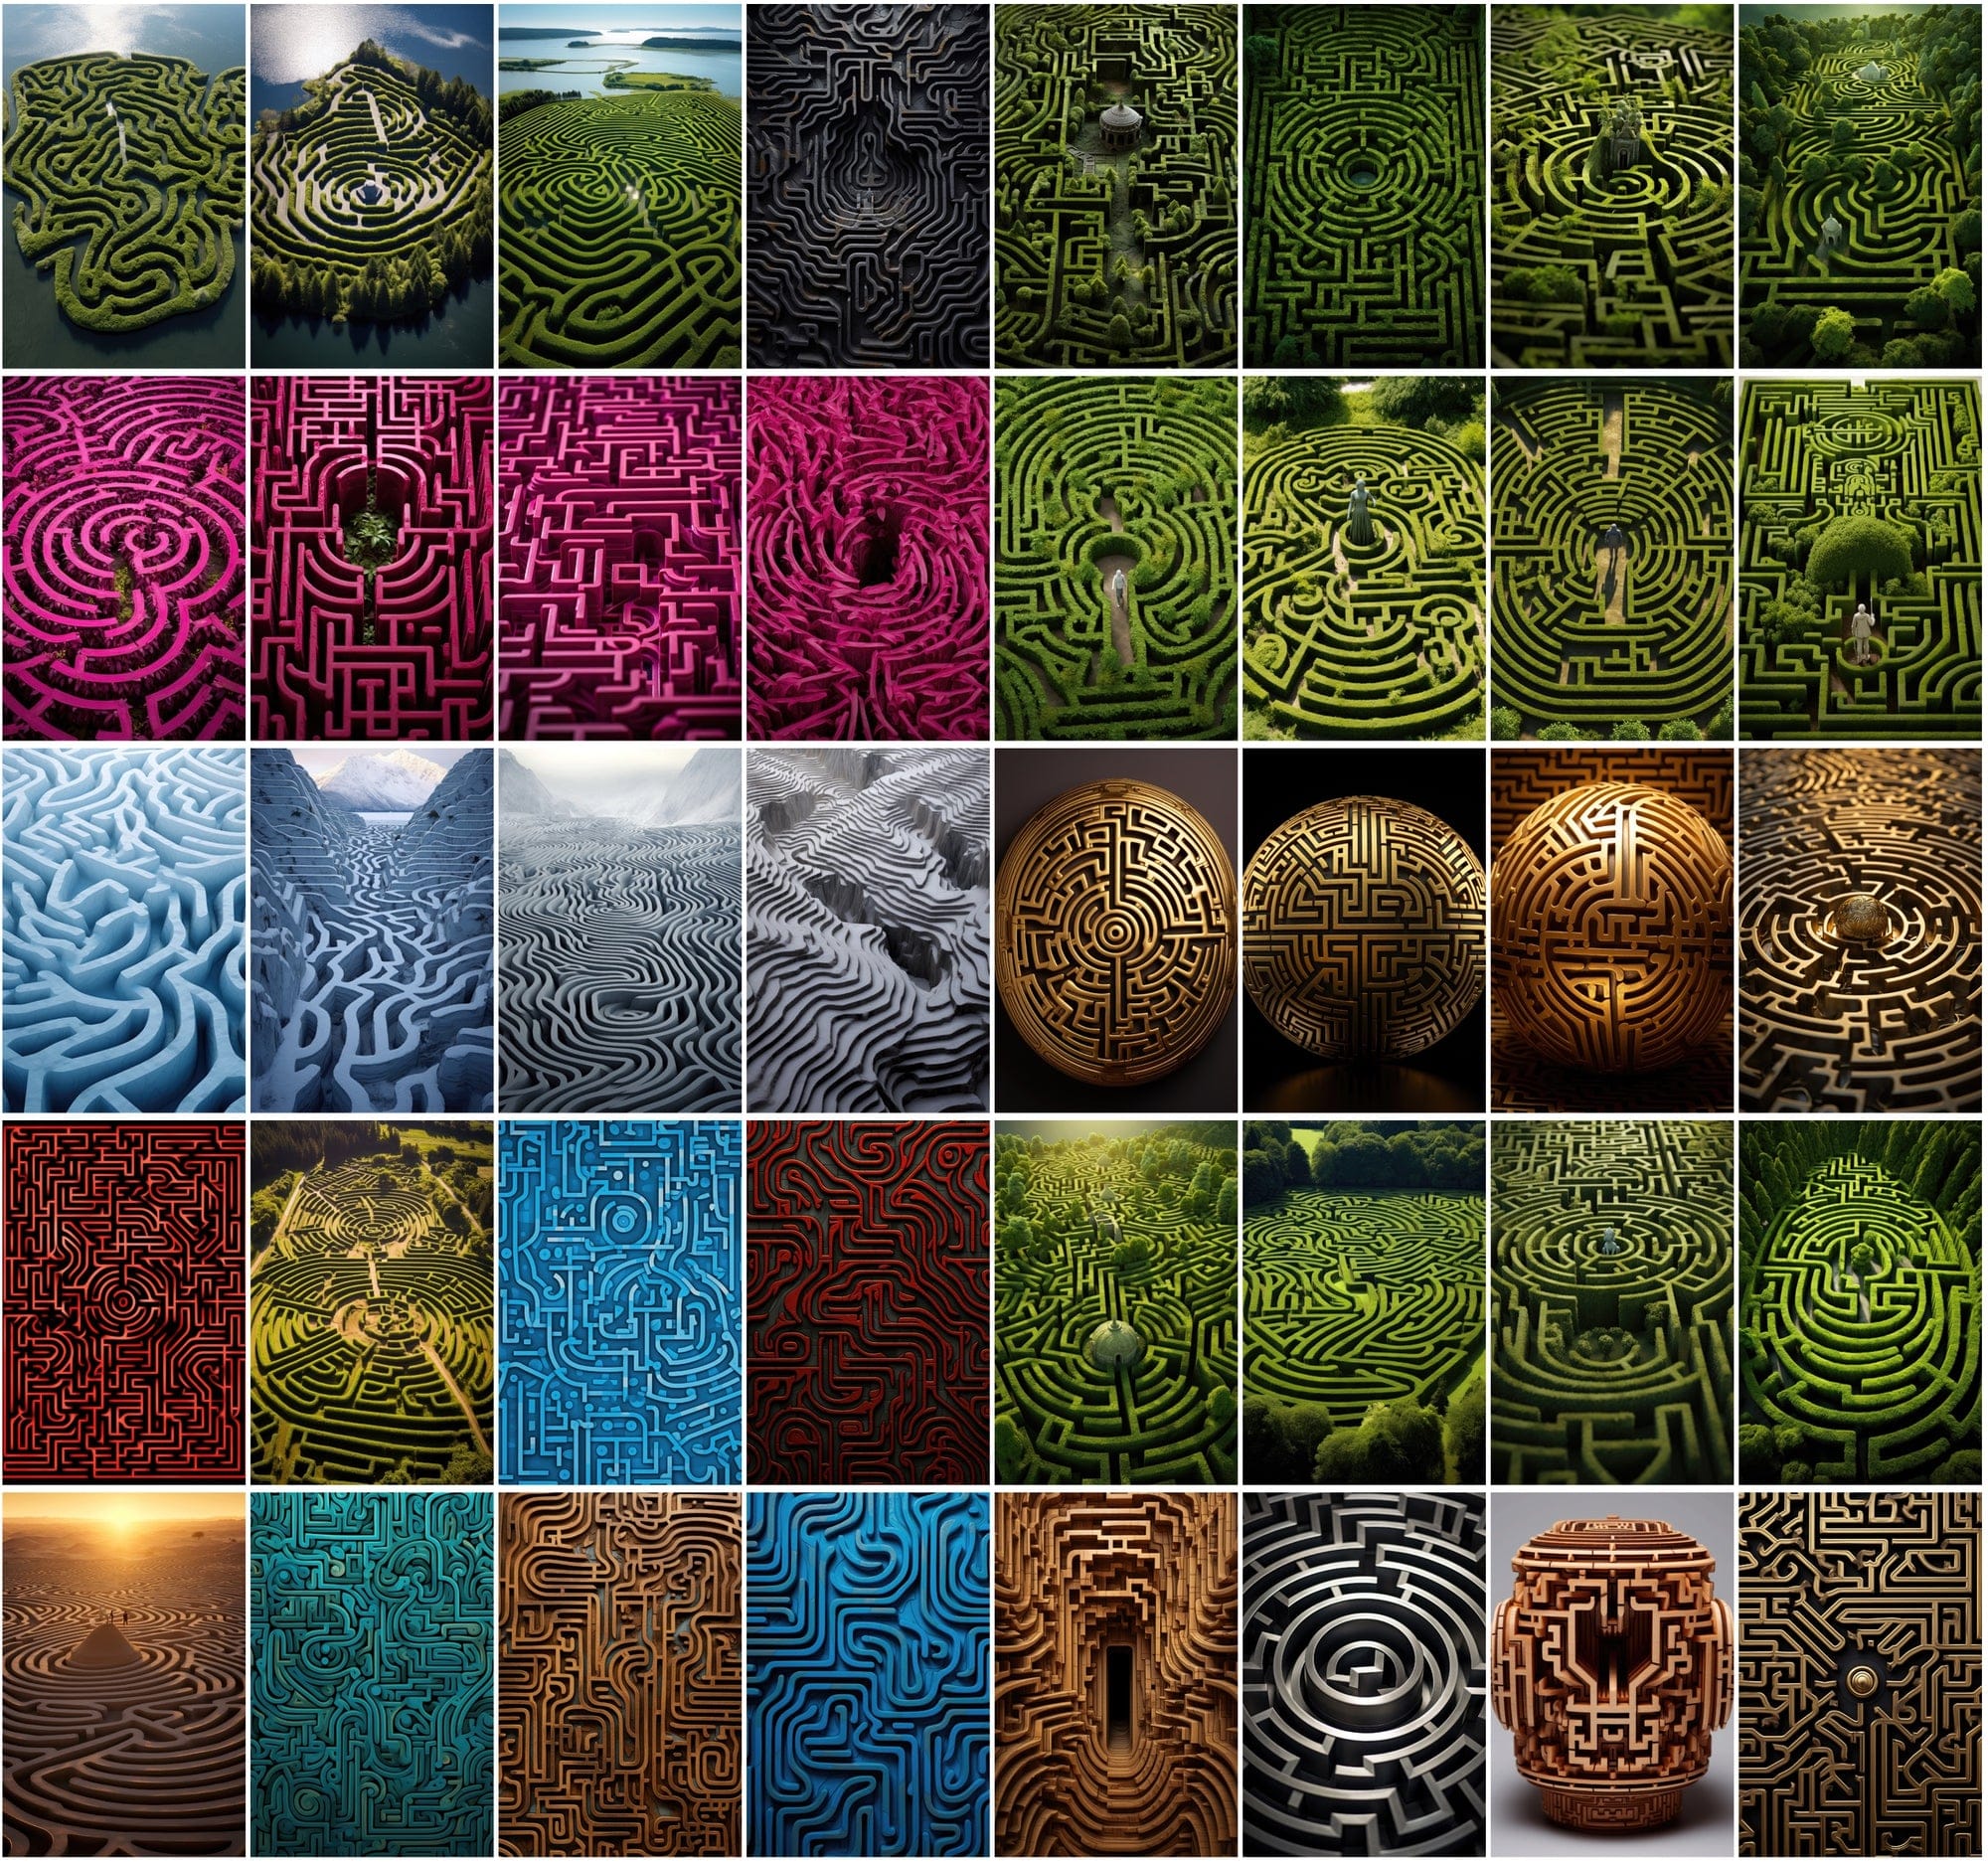 650 Colorful Maze Patterns, High-Resolution JPGs with Commercial License Digital Download Sumobundle